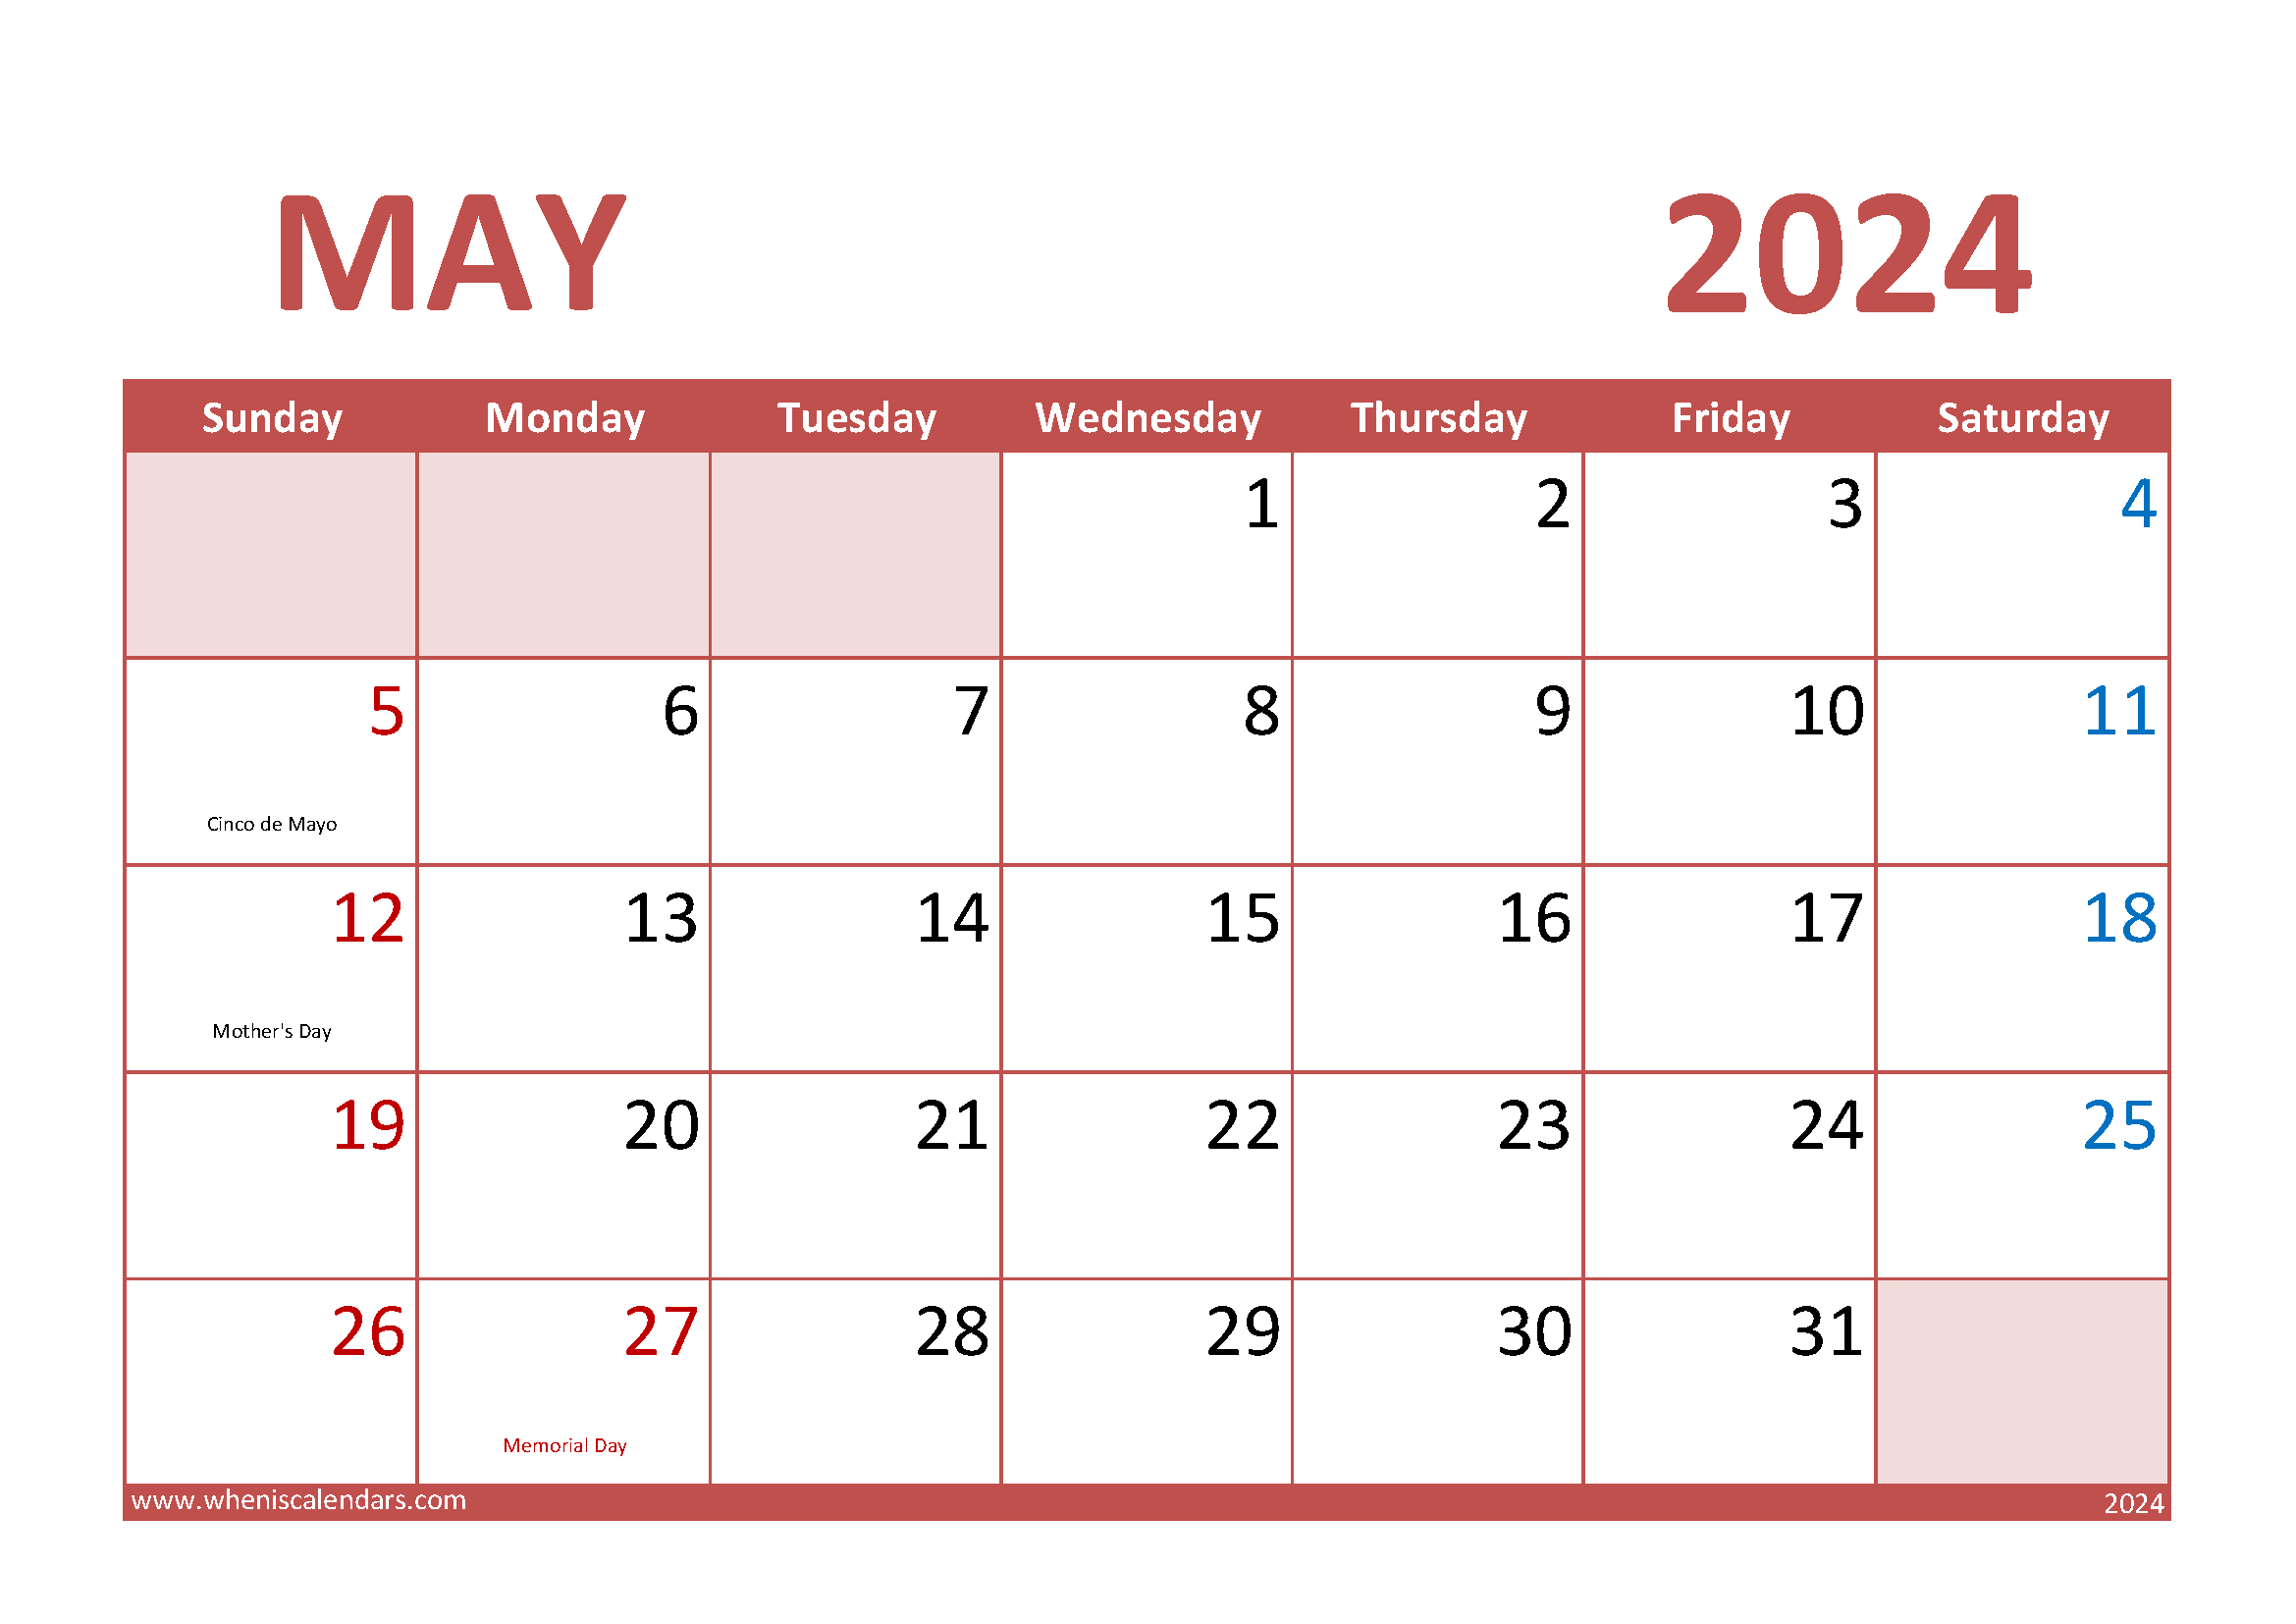 special days in May 2024 M54013